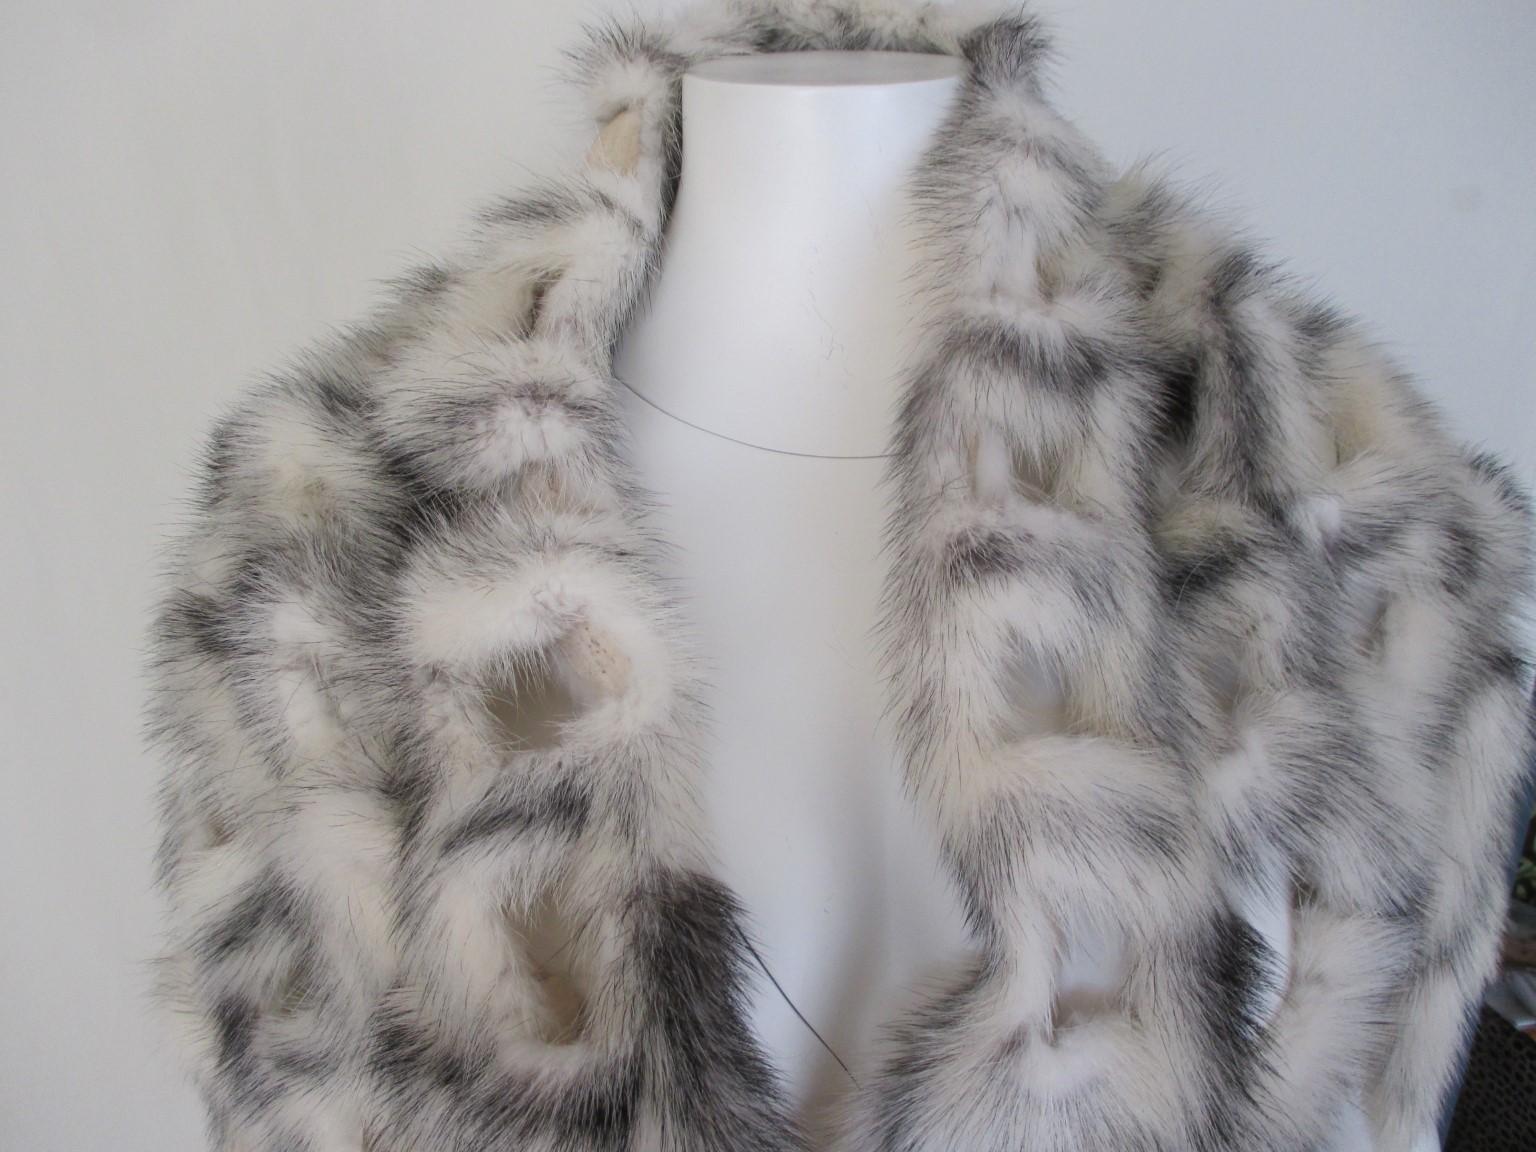 We offer more exclusive fur items, view our frontstore

This vintage stole is made of cross mink/ Kohinoor fur and is very light to wear.
Condition, pre-owned with some wear and tear
Size fits like small to medium

Please note that vintage items are